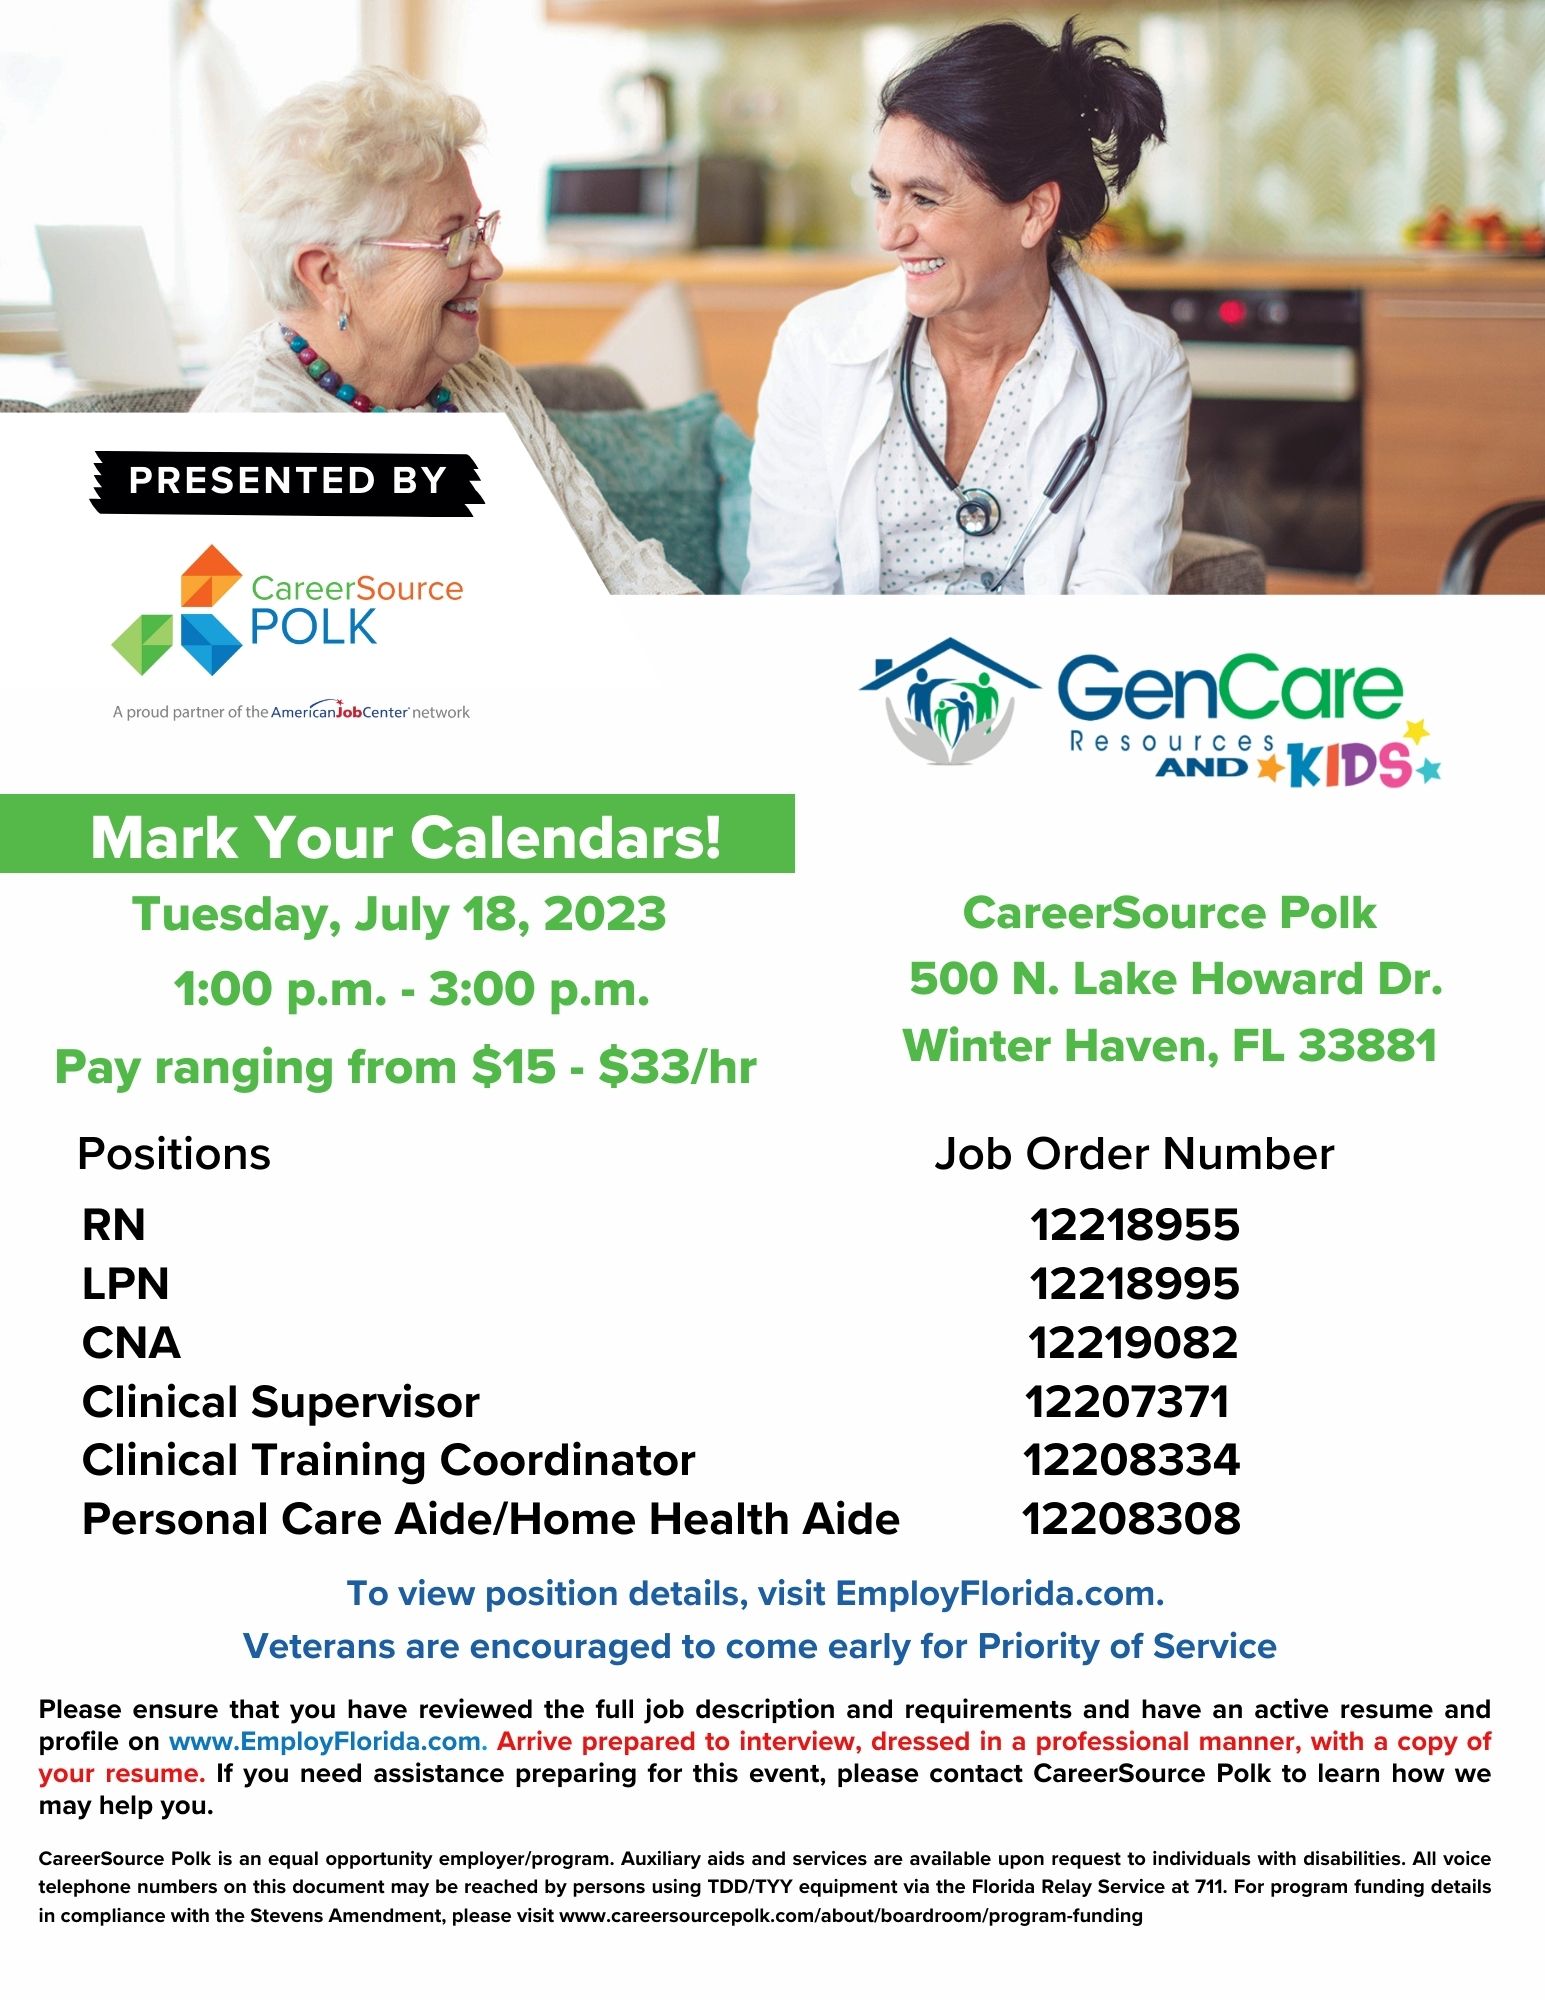 GenCare Resources and Kids Hiring Event. July 18 from 1 pm to 3 pm at CareerSource Polk Winter Haven at 500 N Lake Howard Drive, Winter Haven, FL 33881. Positions paying $15 to $33/hr. RN, LPN, CNA, Clinical Supervisor, Clinical Training Coordinator, Personal Care Aide/Home Health Aide